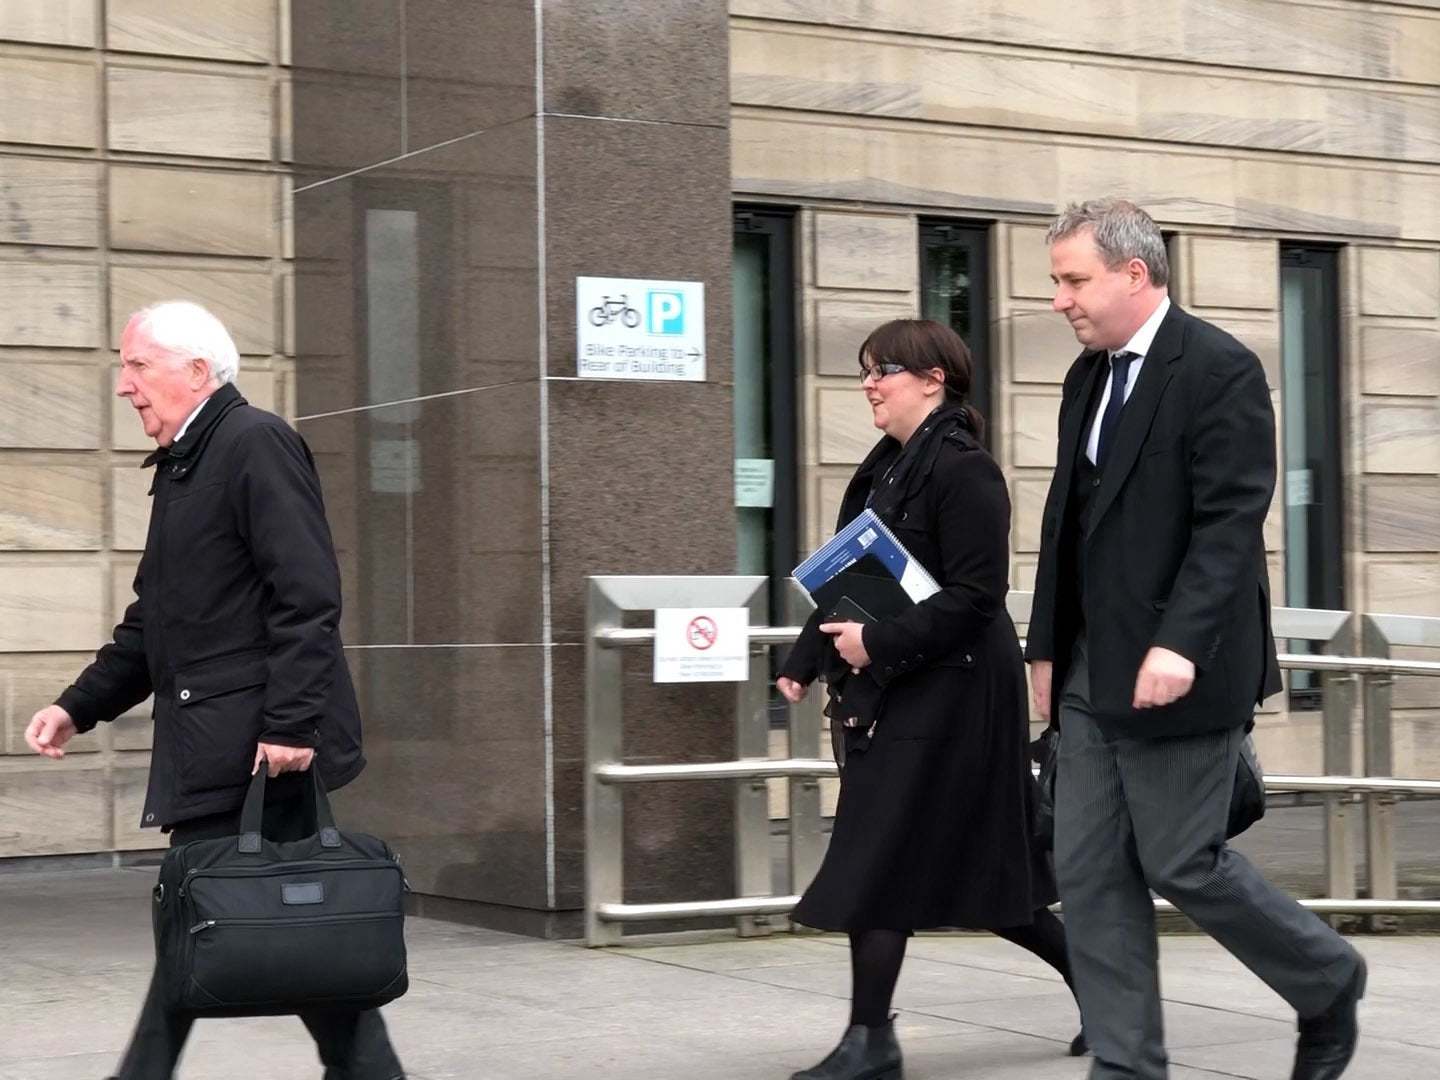 Former SNP MP Natalie McGarry arrives at Glasgow Sheriff Court on 6 June 2019 where she was jailed for 18 months for embezzling more than ££25,600.